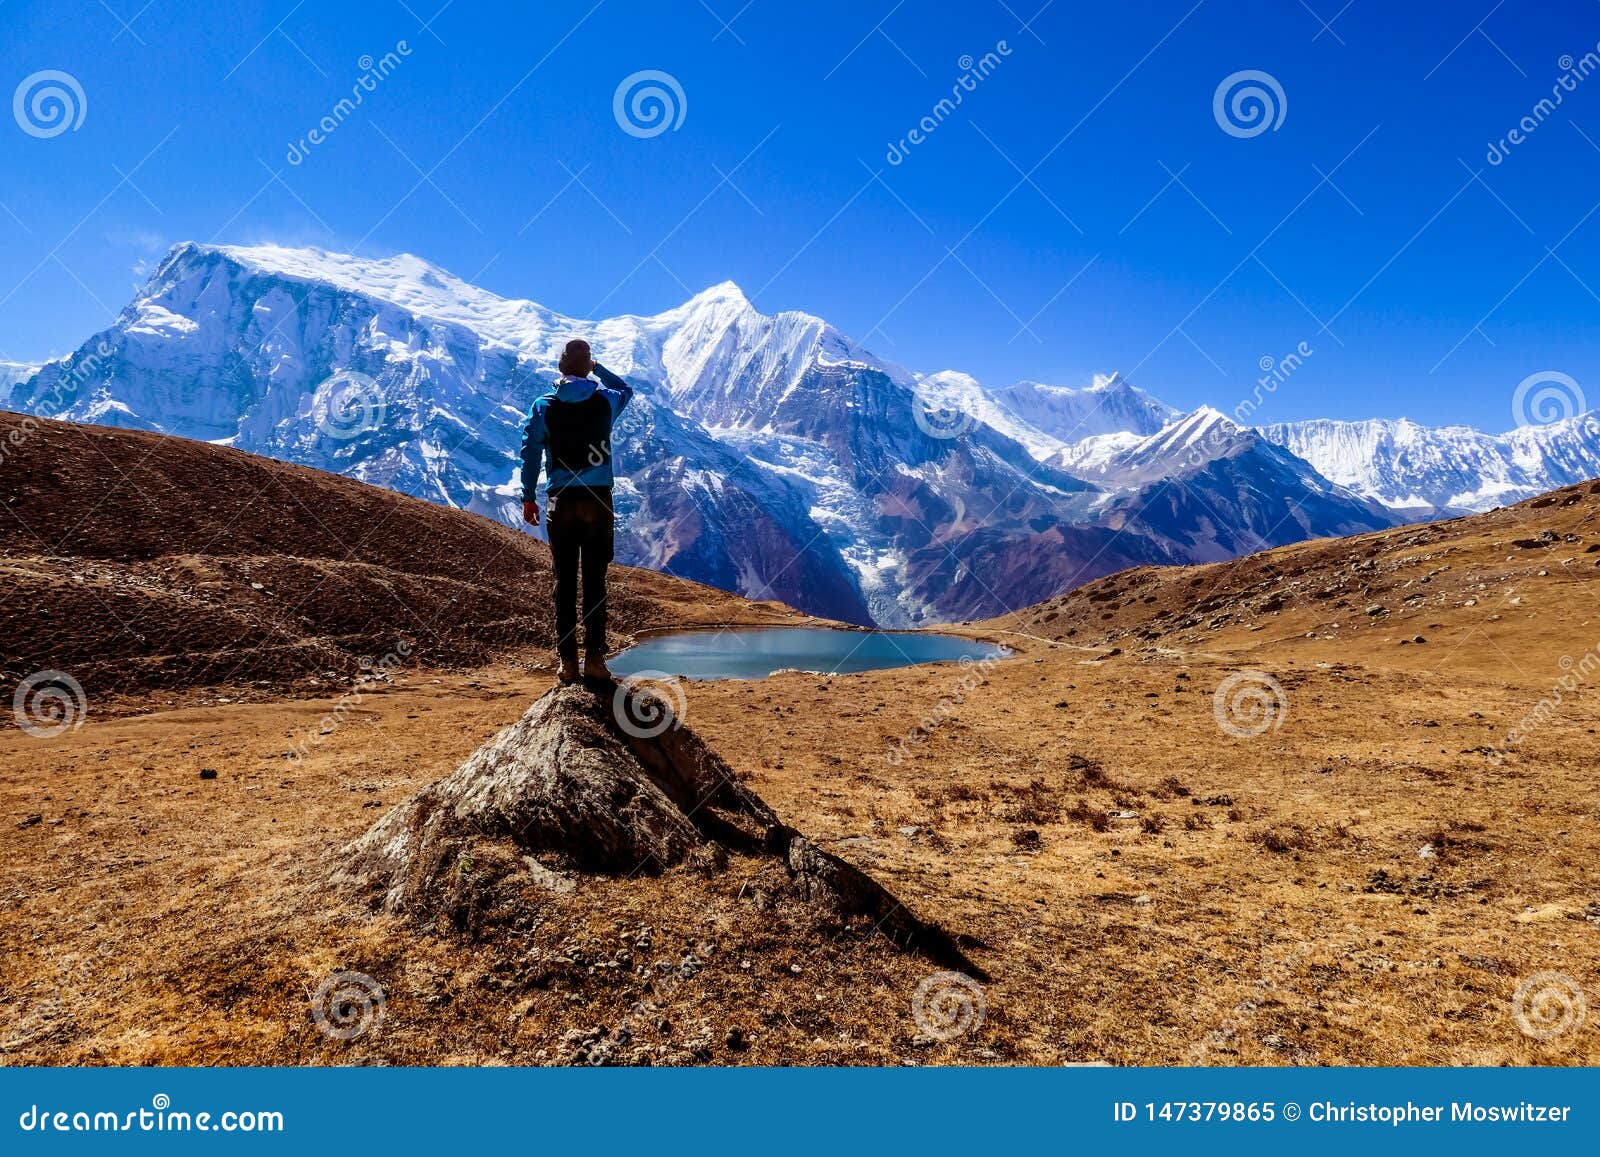 nepal - man standing on a rock in the nearby of the ice lake, annpurna circuit trek in himalayas.